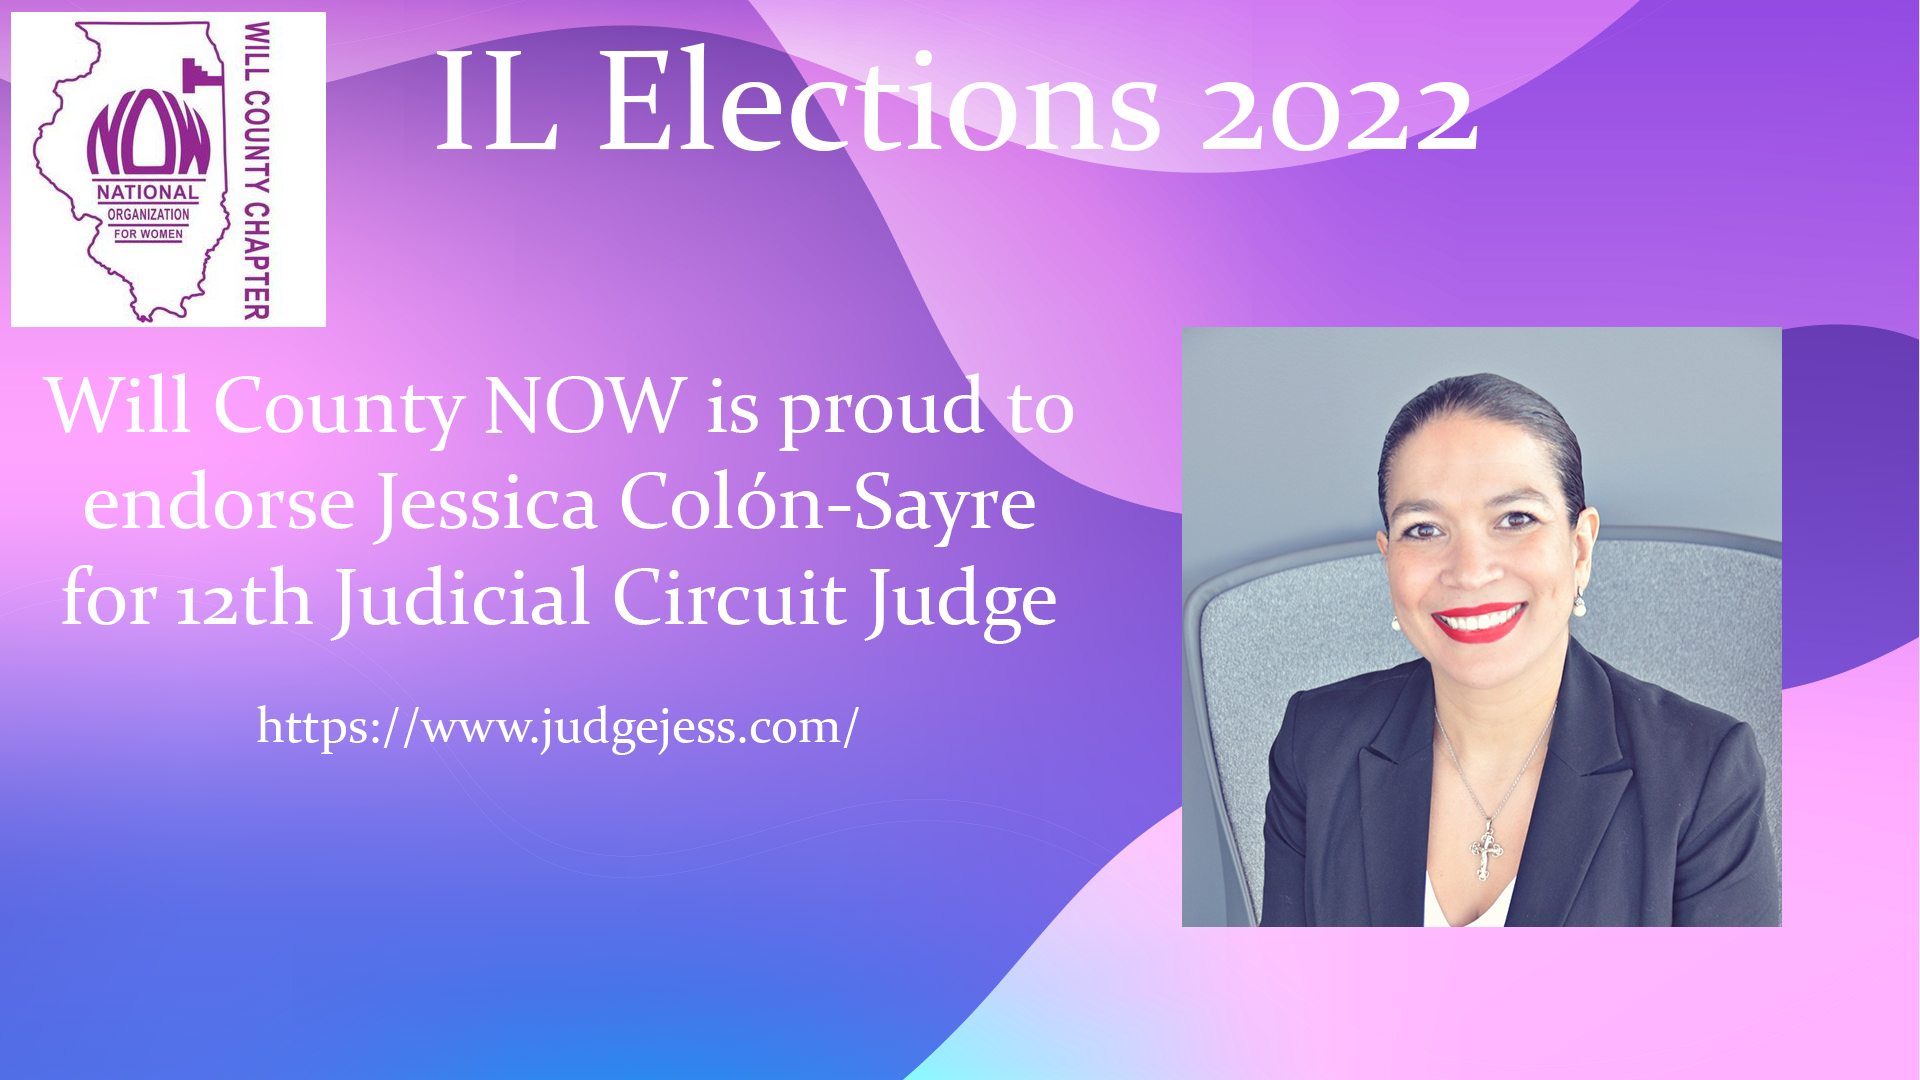 Will County NOW Endorses Jessica Colón-Sayre for 12th Judicial Circuit Judge